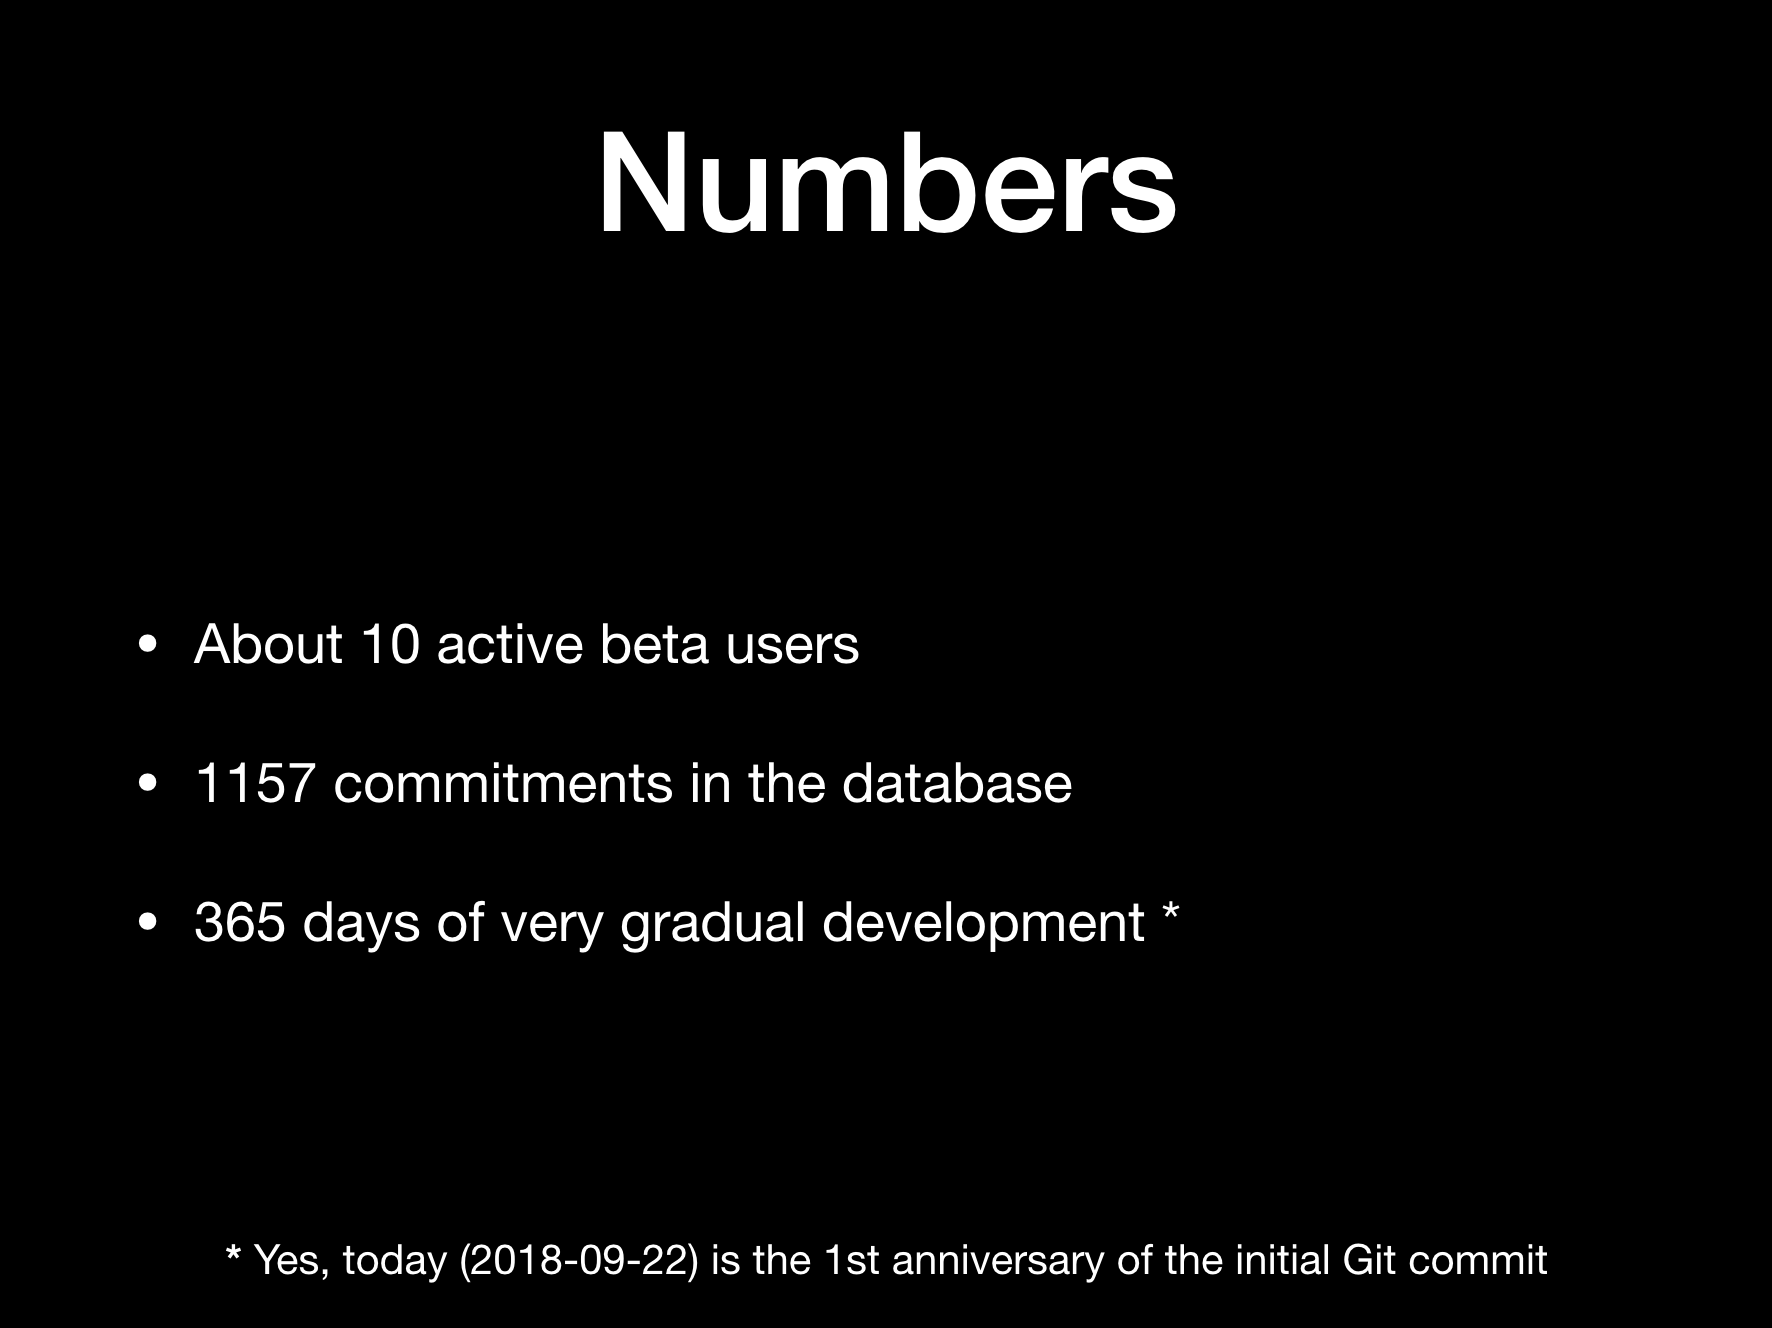 Numbers:  
* About 10 active beta users  
* 1157 commitments in the database  
* 365 days of very gradual development [1]  
(footnote: [1] Yes, today (2018-09-22) is the 1st anniversary of the initial Git commit]